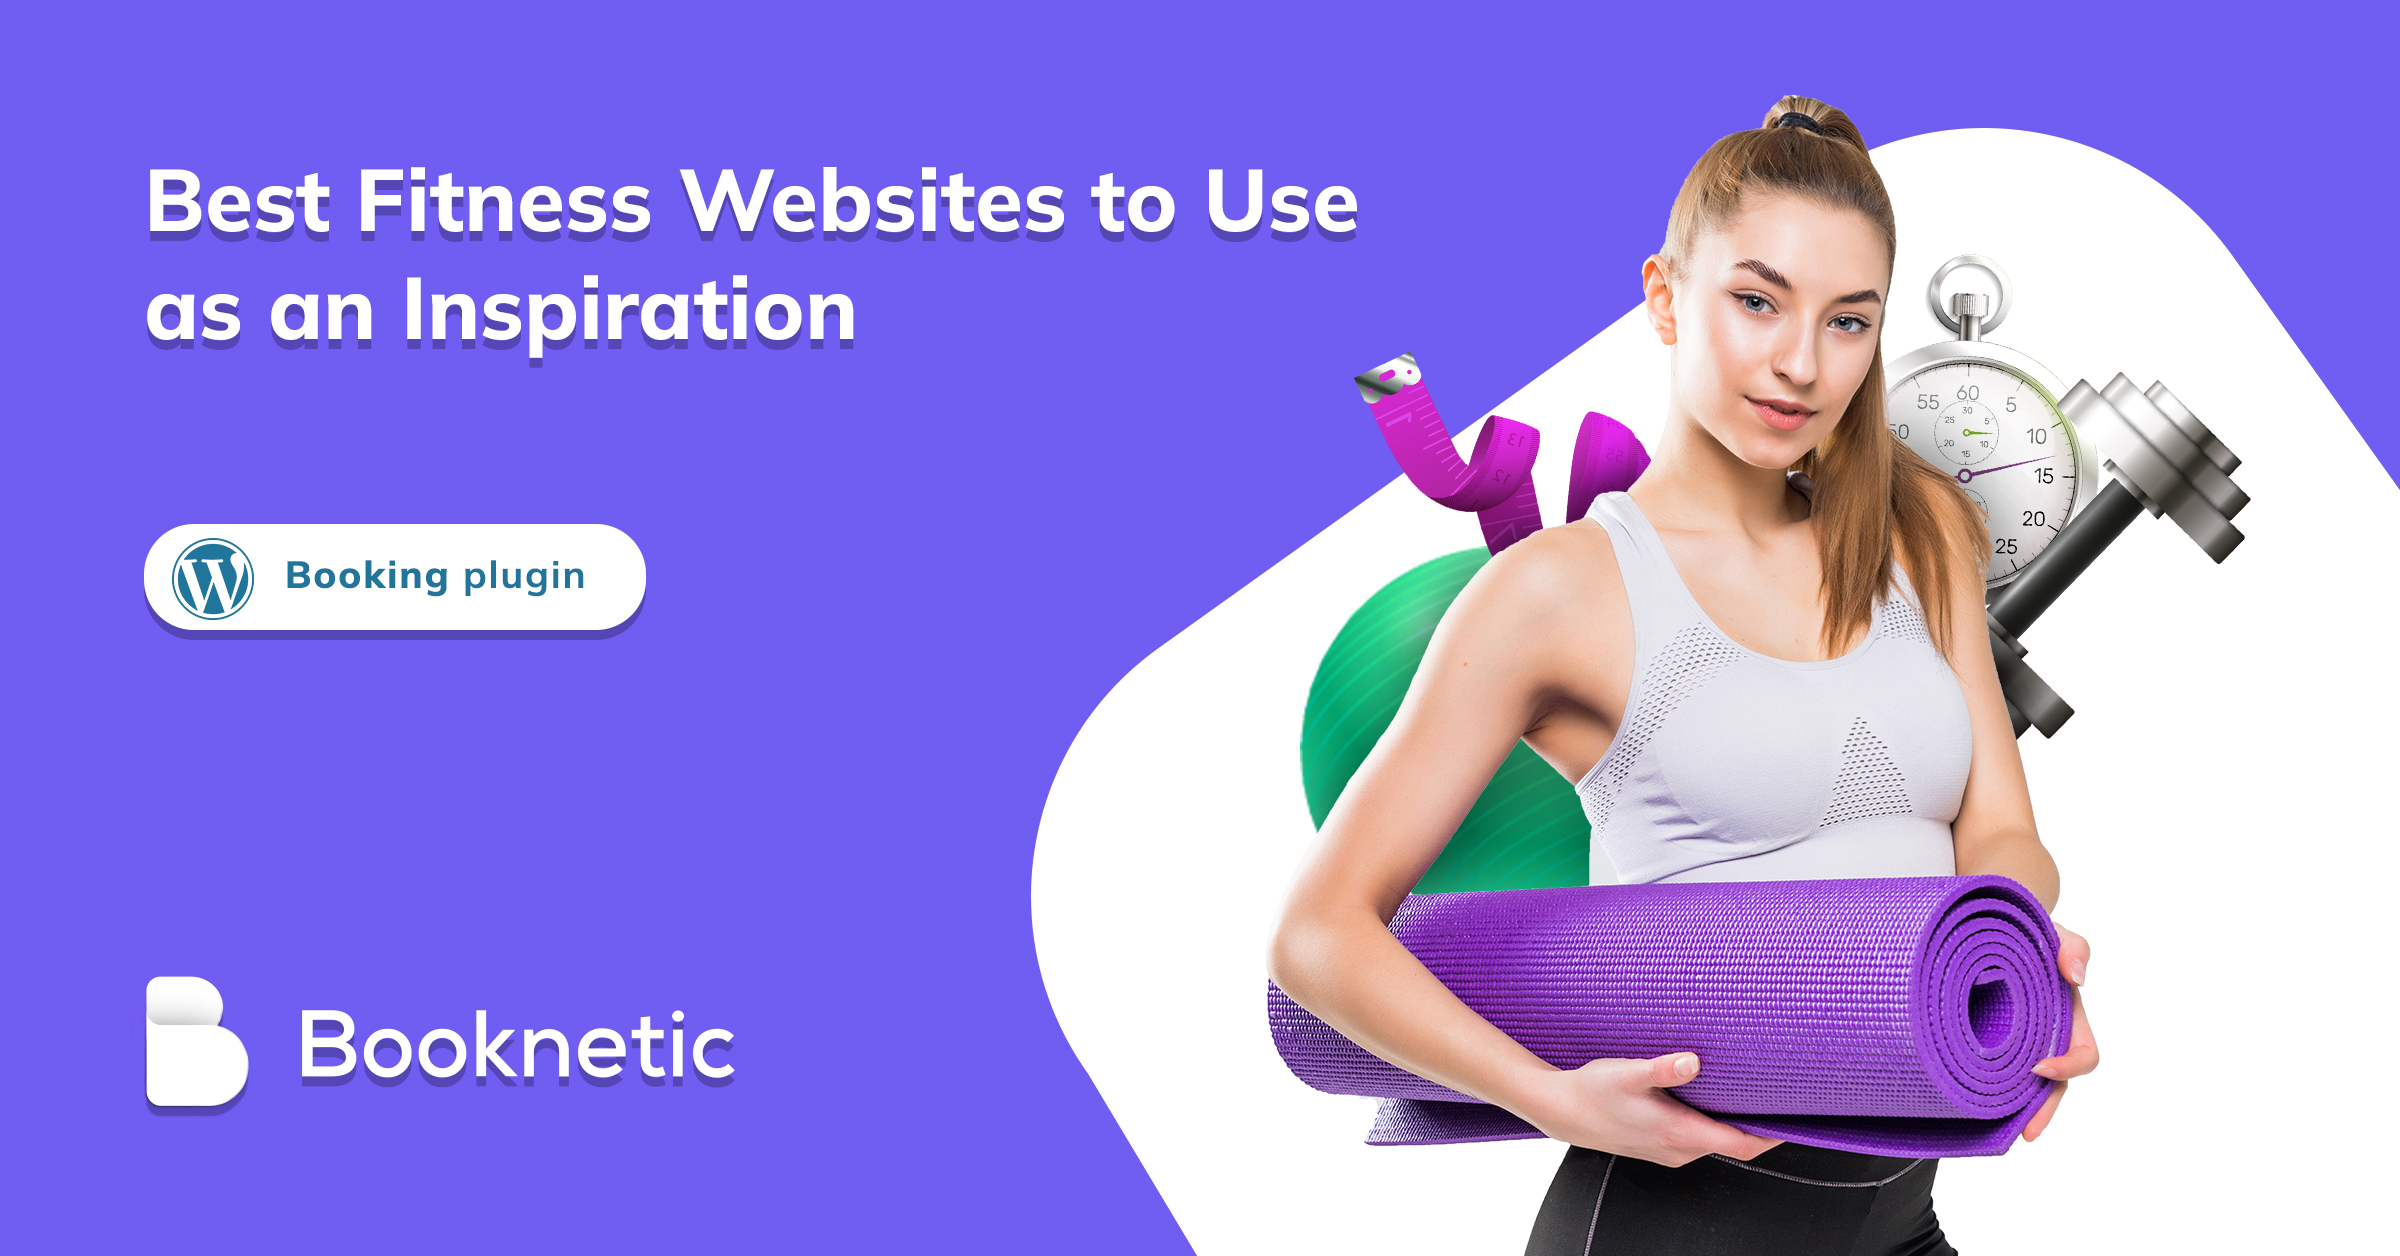 Best Fitness Websites to Use as an Inspiration